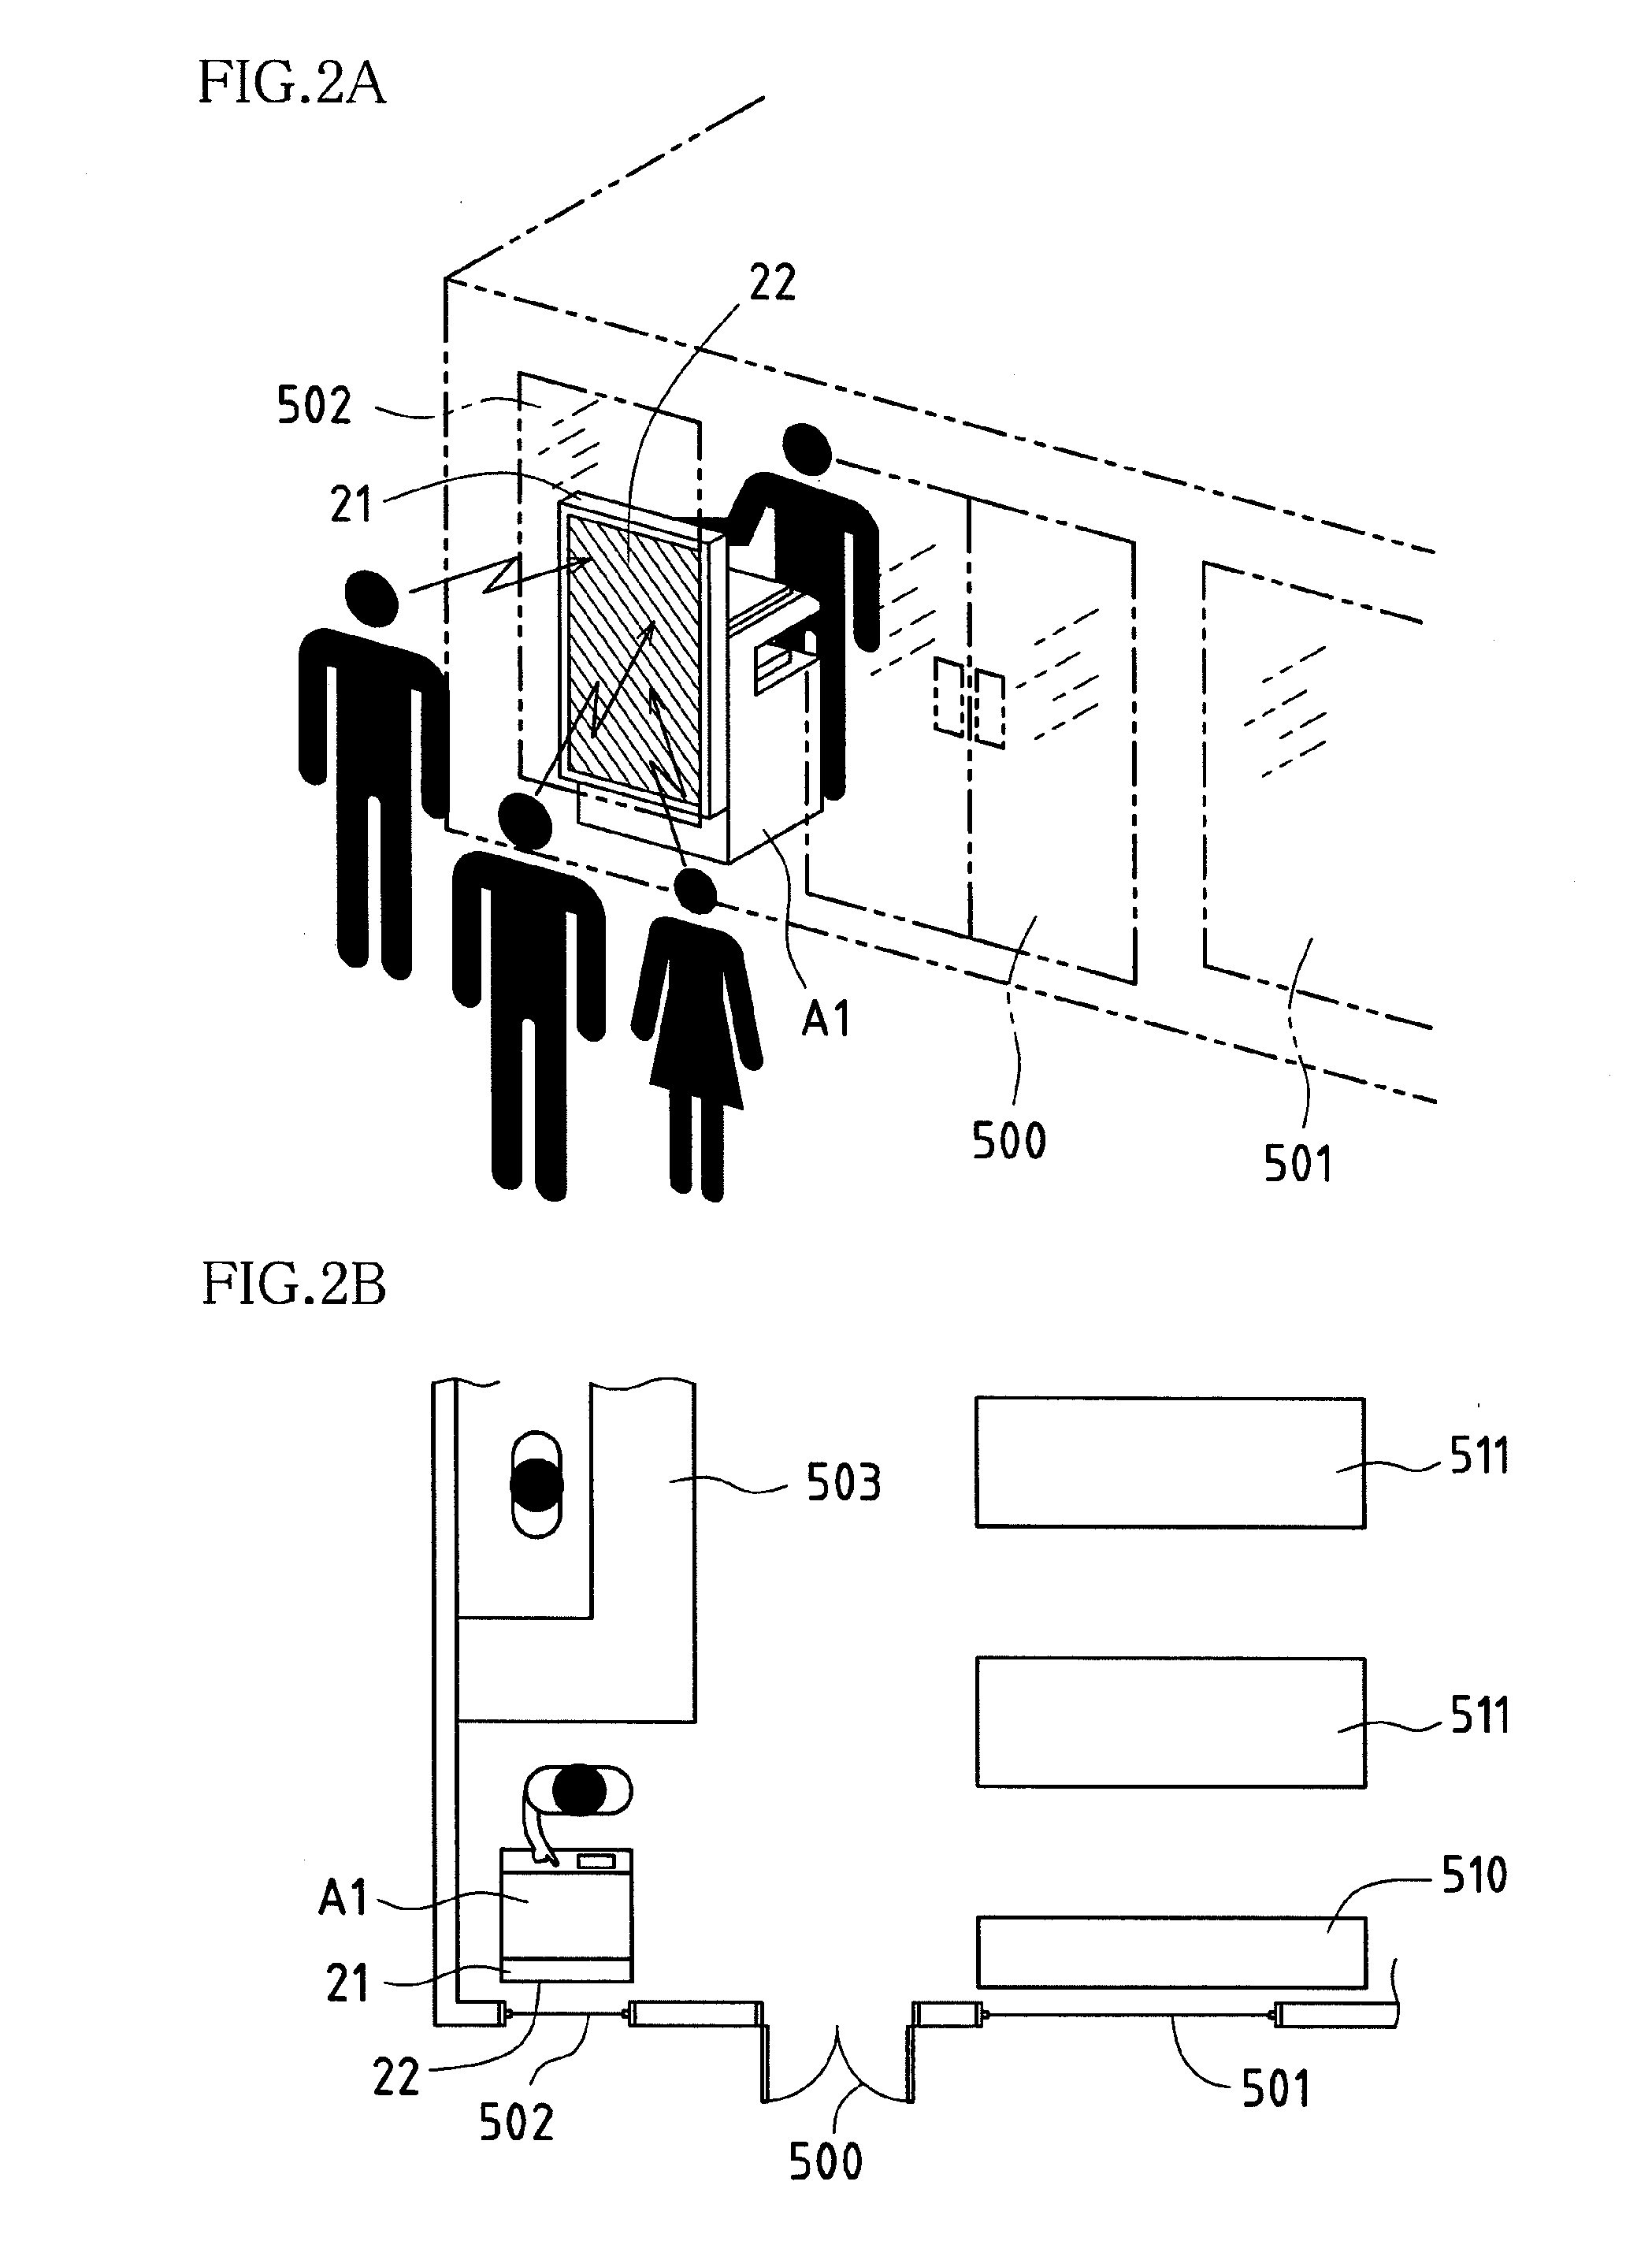 Display-integrated image forming apparatus